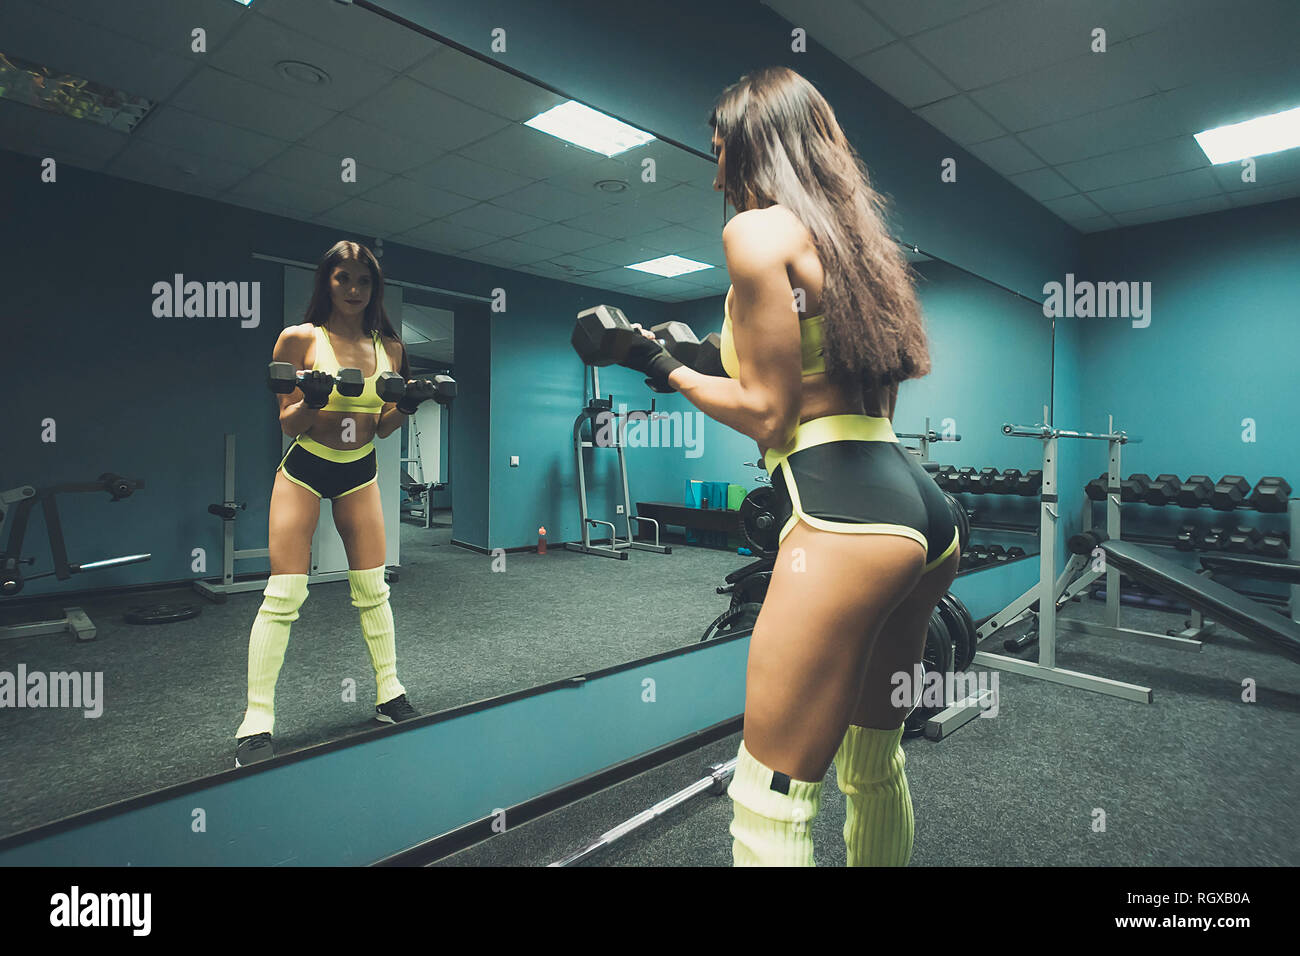 Female fitness coach with long dark hair in top and tiny sport shorts posing with dumbbells against the mirror of empty gym room. Sporty woman lifting Stock Photo